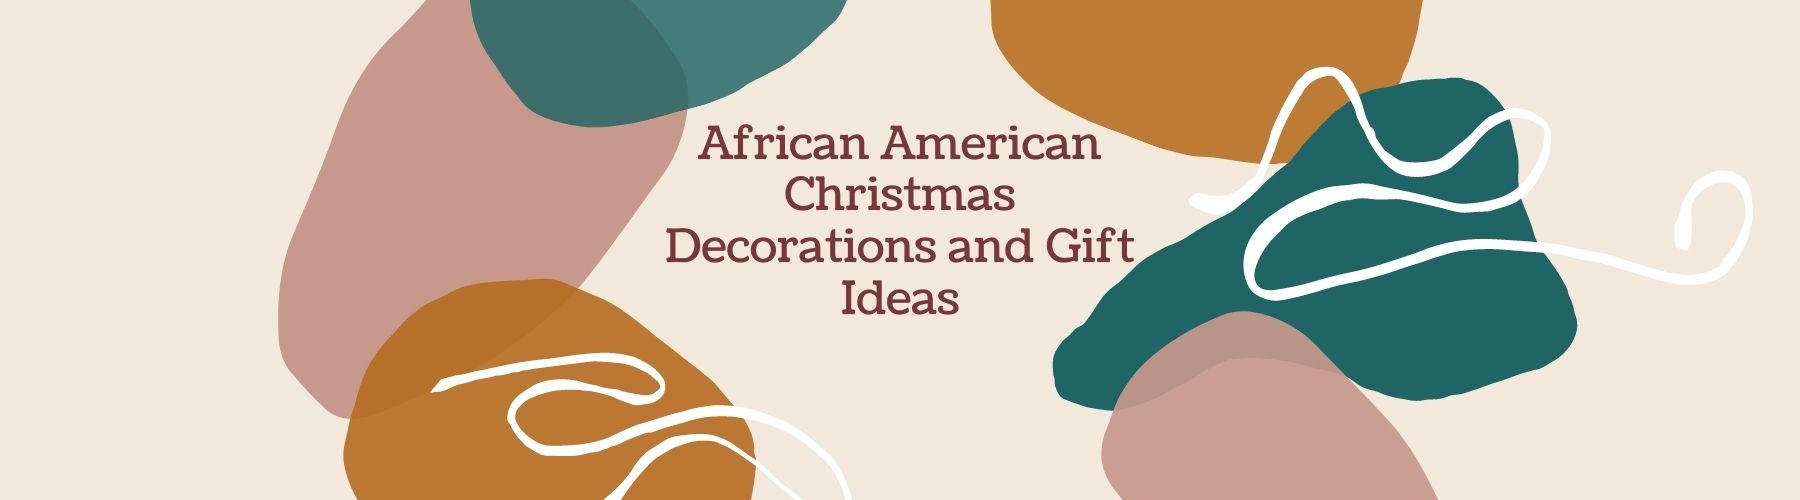 African American Christmas Decorations and Gift Ideas 🎁